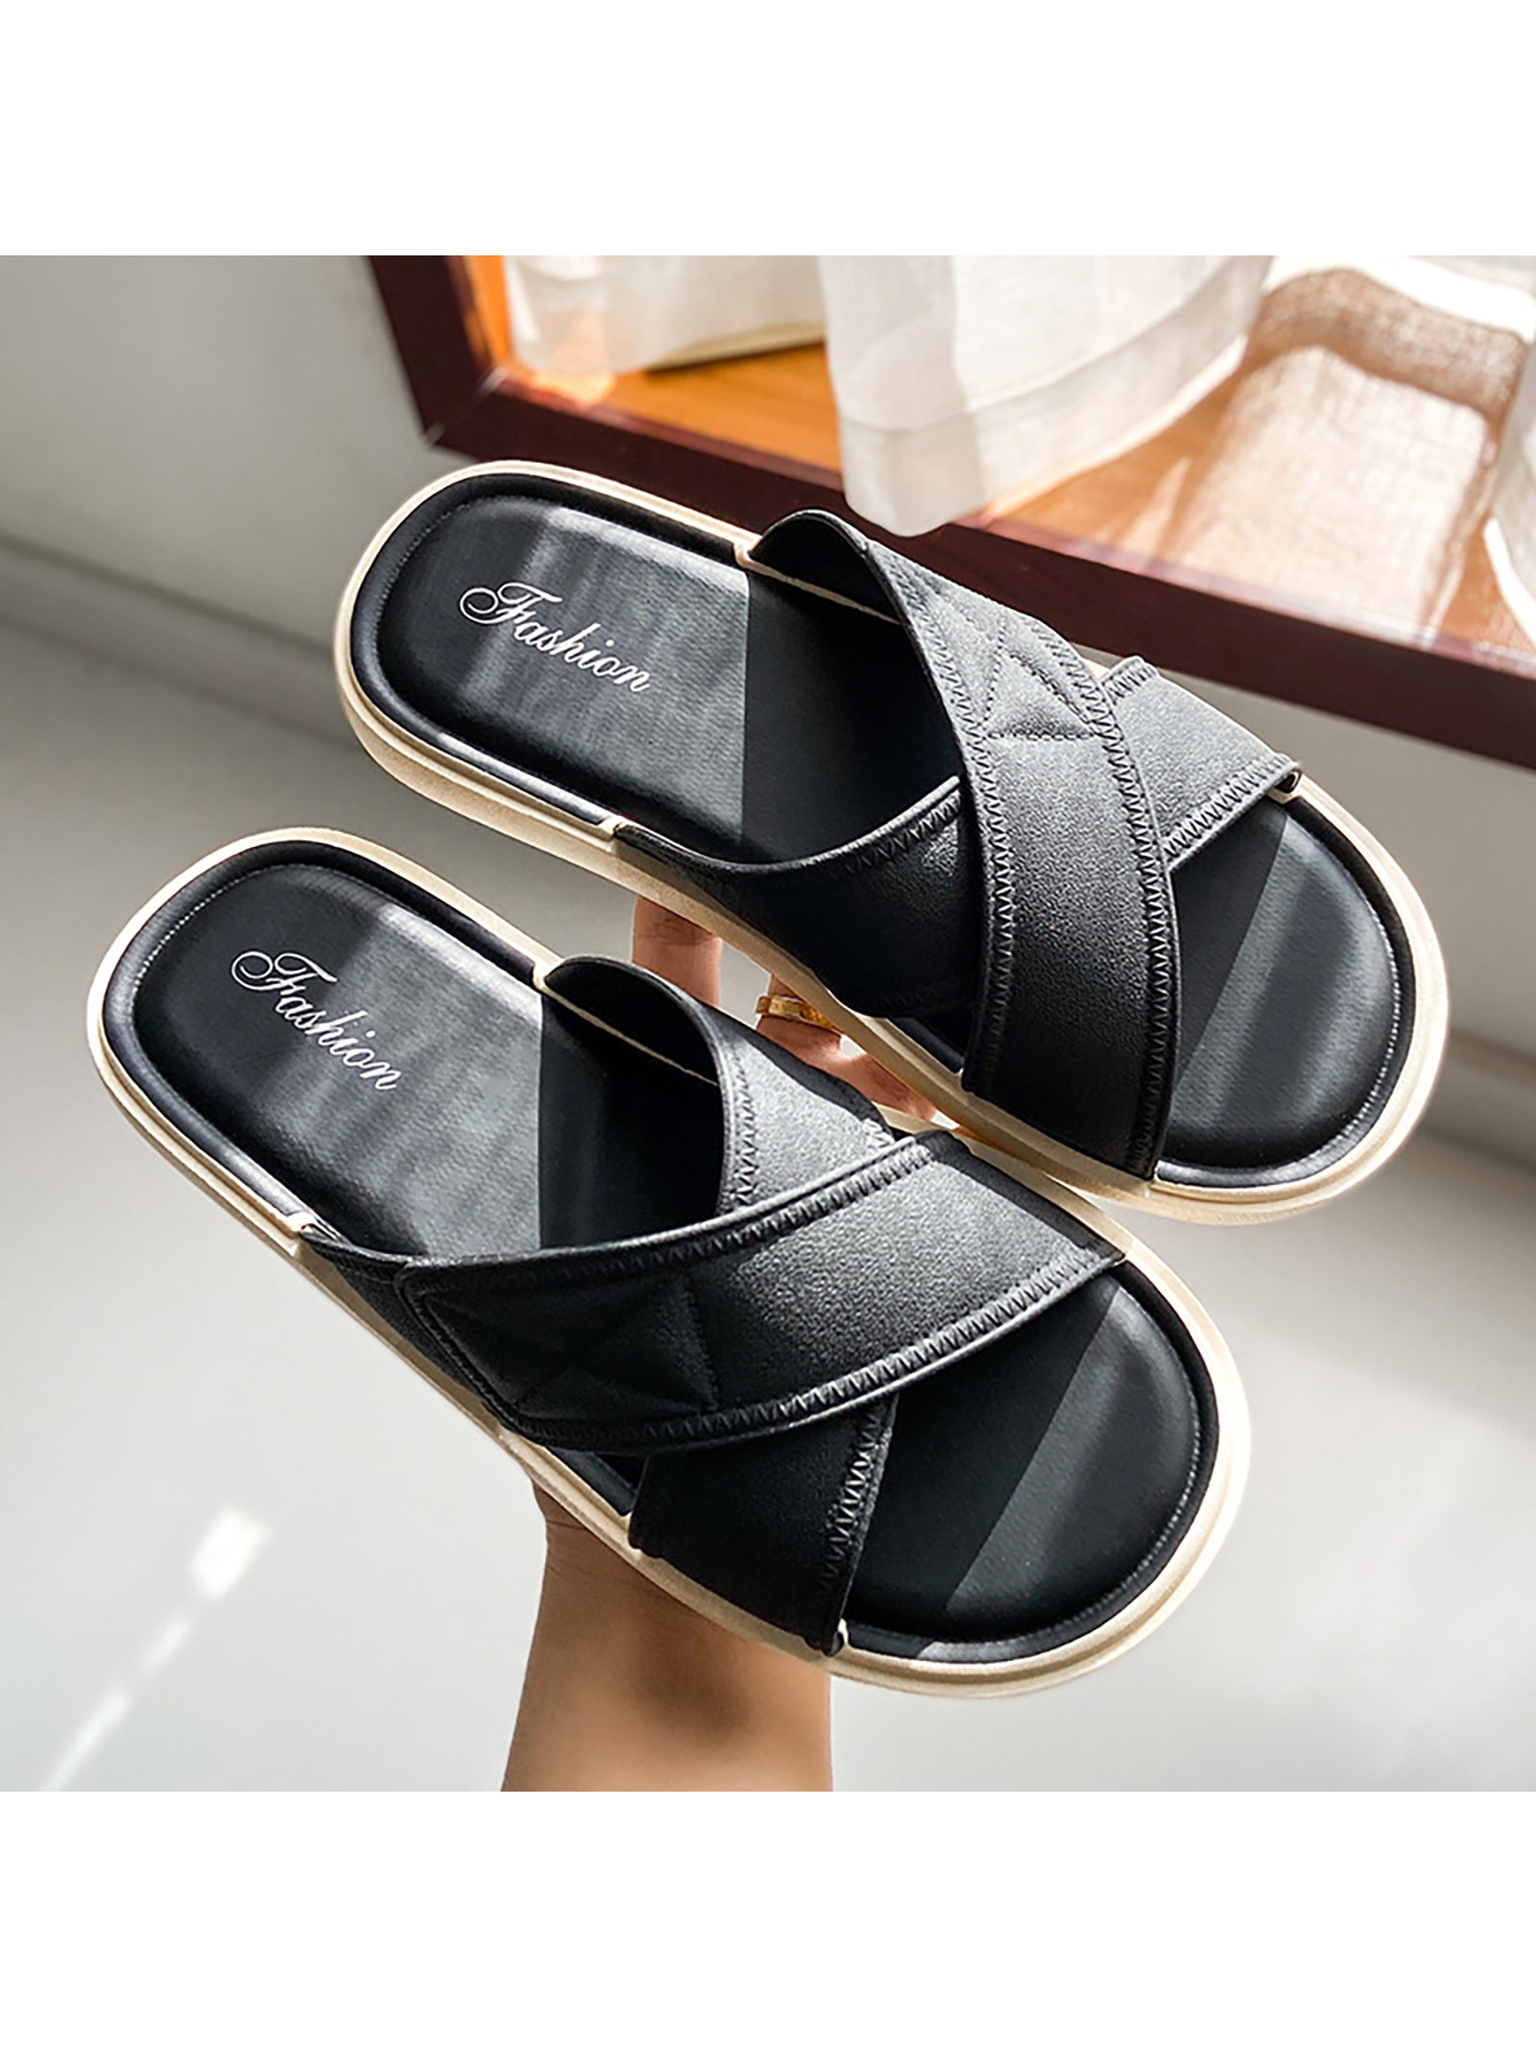 New Arrival Fashionable Simple Elegant Slippers For Home, Bathroom And Outdoor With Soft Pvc Slip-Resistant Bottom, Suitable For Indoor And Outdoor Wear, Fashion Style-Black-5